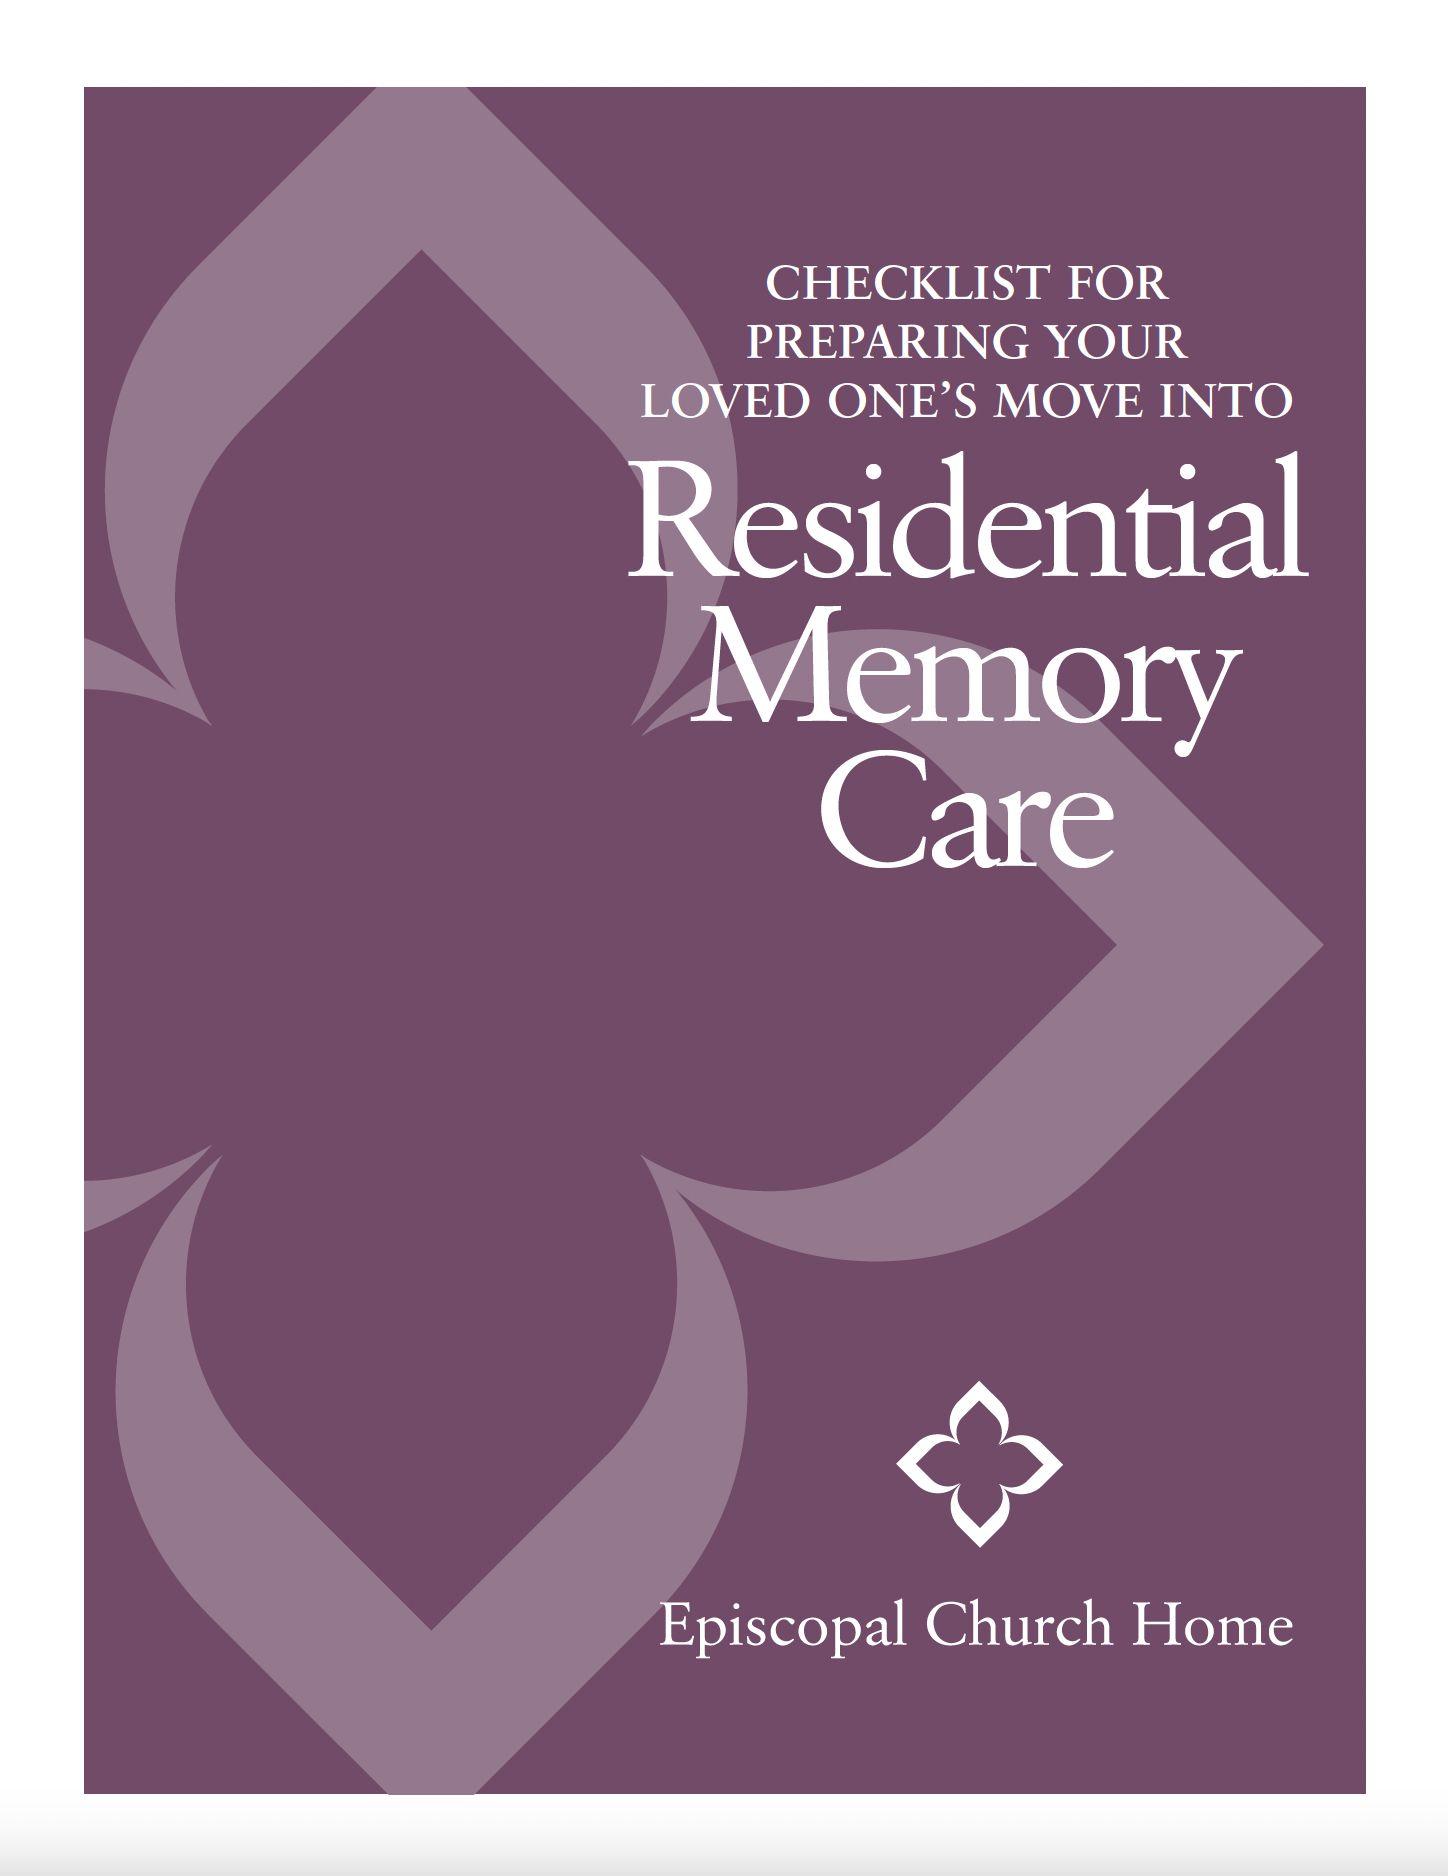 Checklist for Preparing Your Loved One's Move Into Residential Memory Care